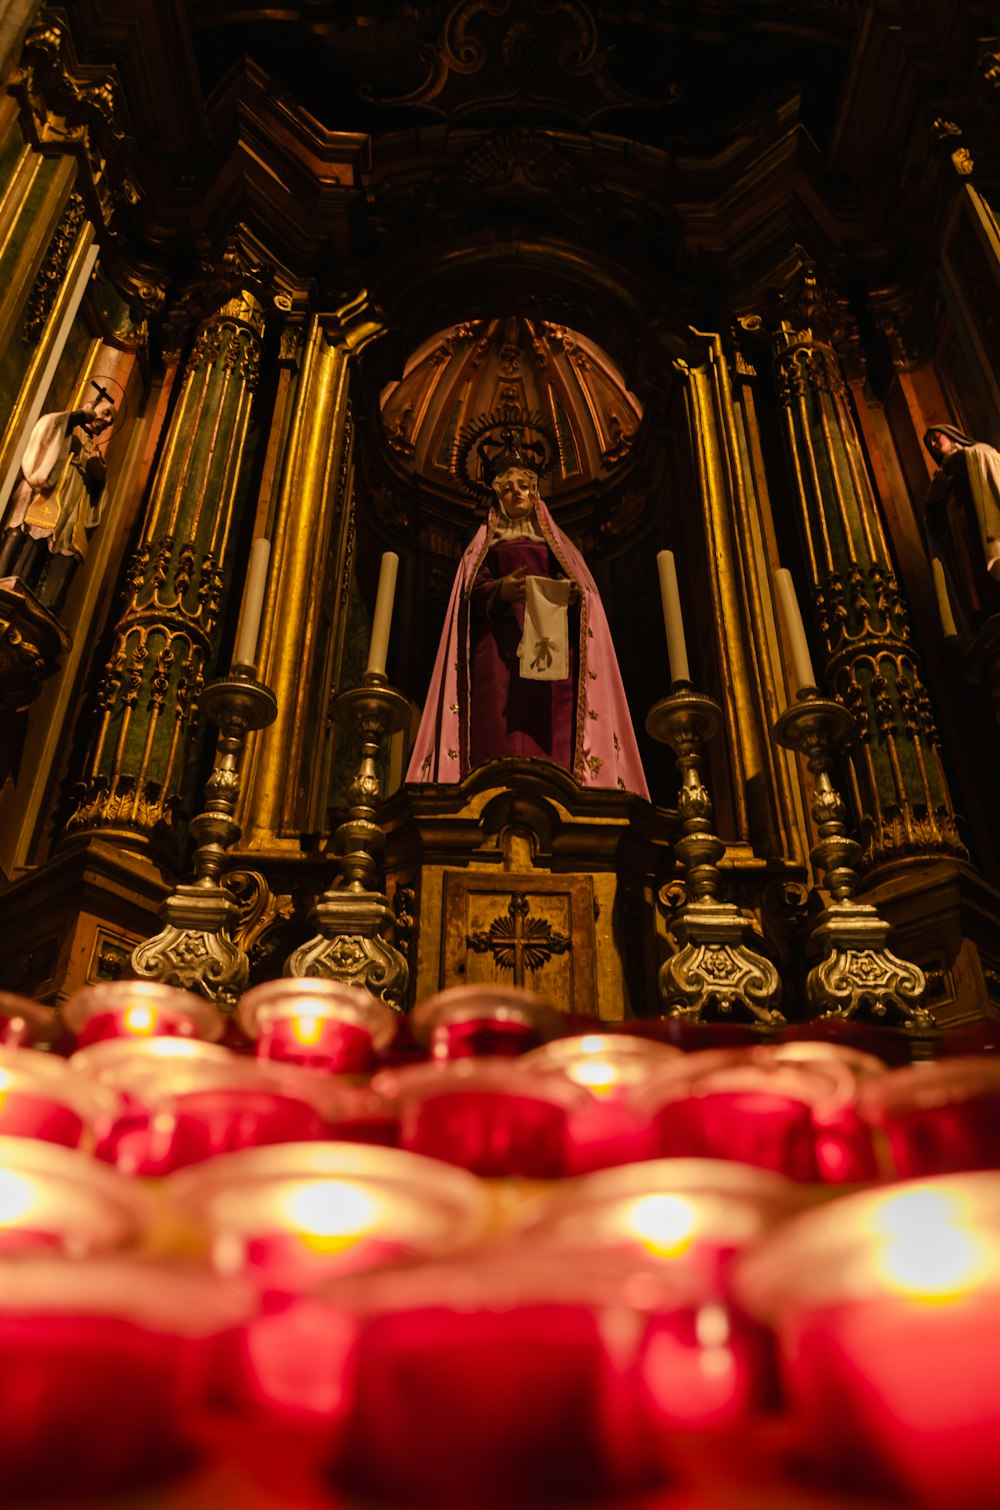 a statue of a person in a church surrounded by candles